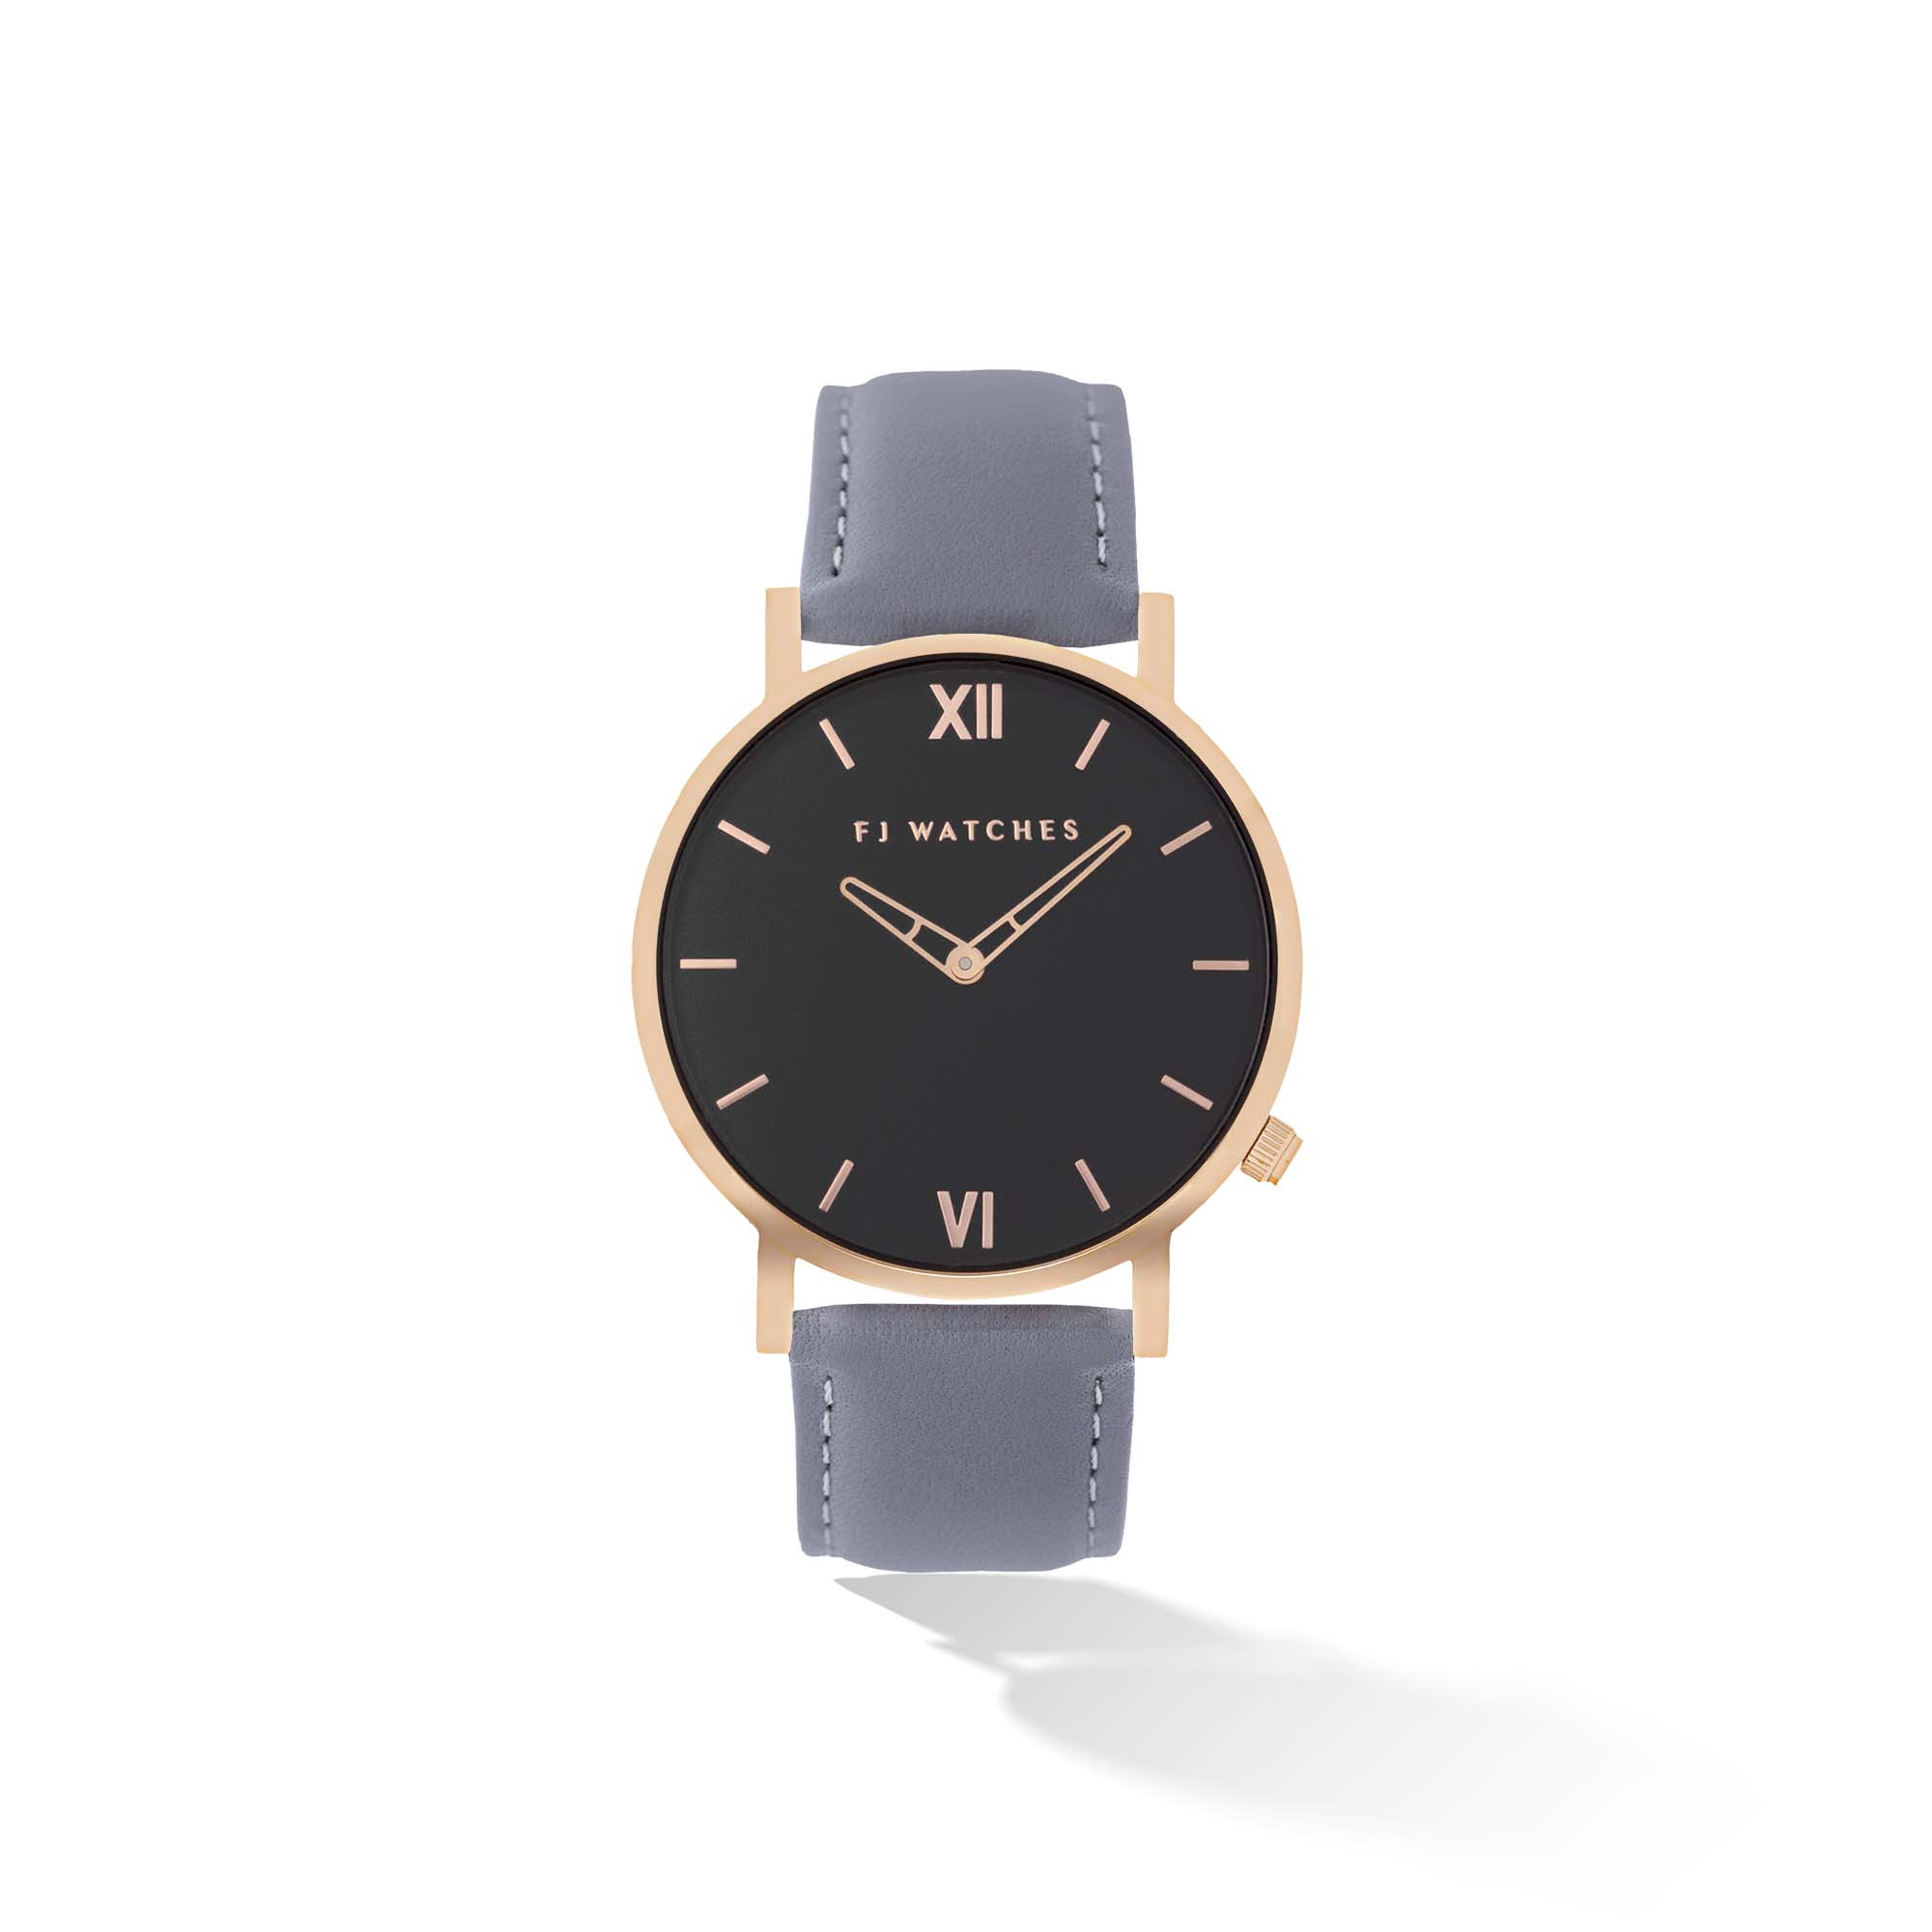 Discover Golden moon, a 36 mm women's watch from Five Jwlry with a black and rose gold dial. This one can be paired with a wide variety of leather colors, such as black, white, pink, red, blue, gray, tan, brown and beige!